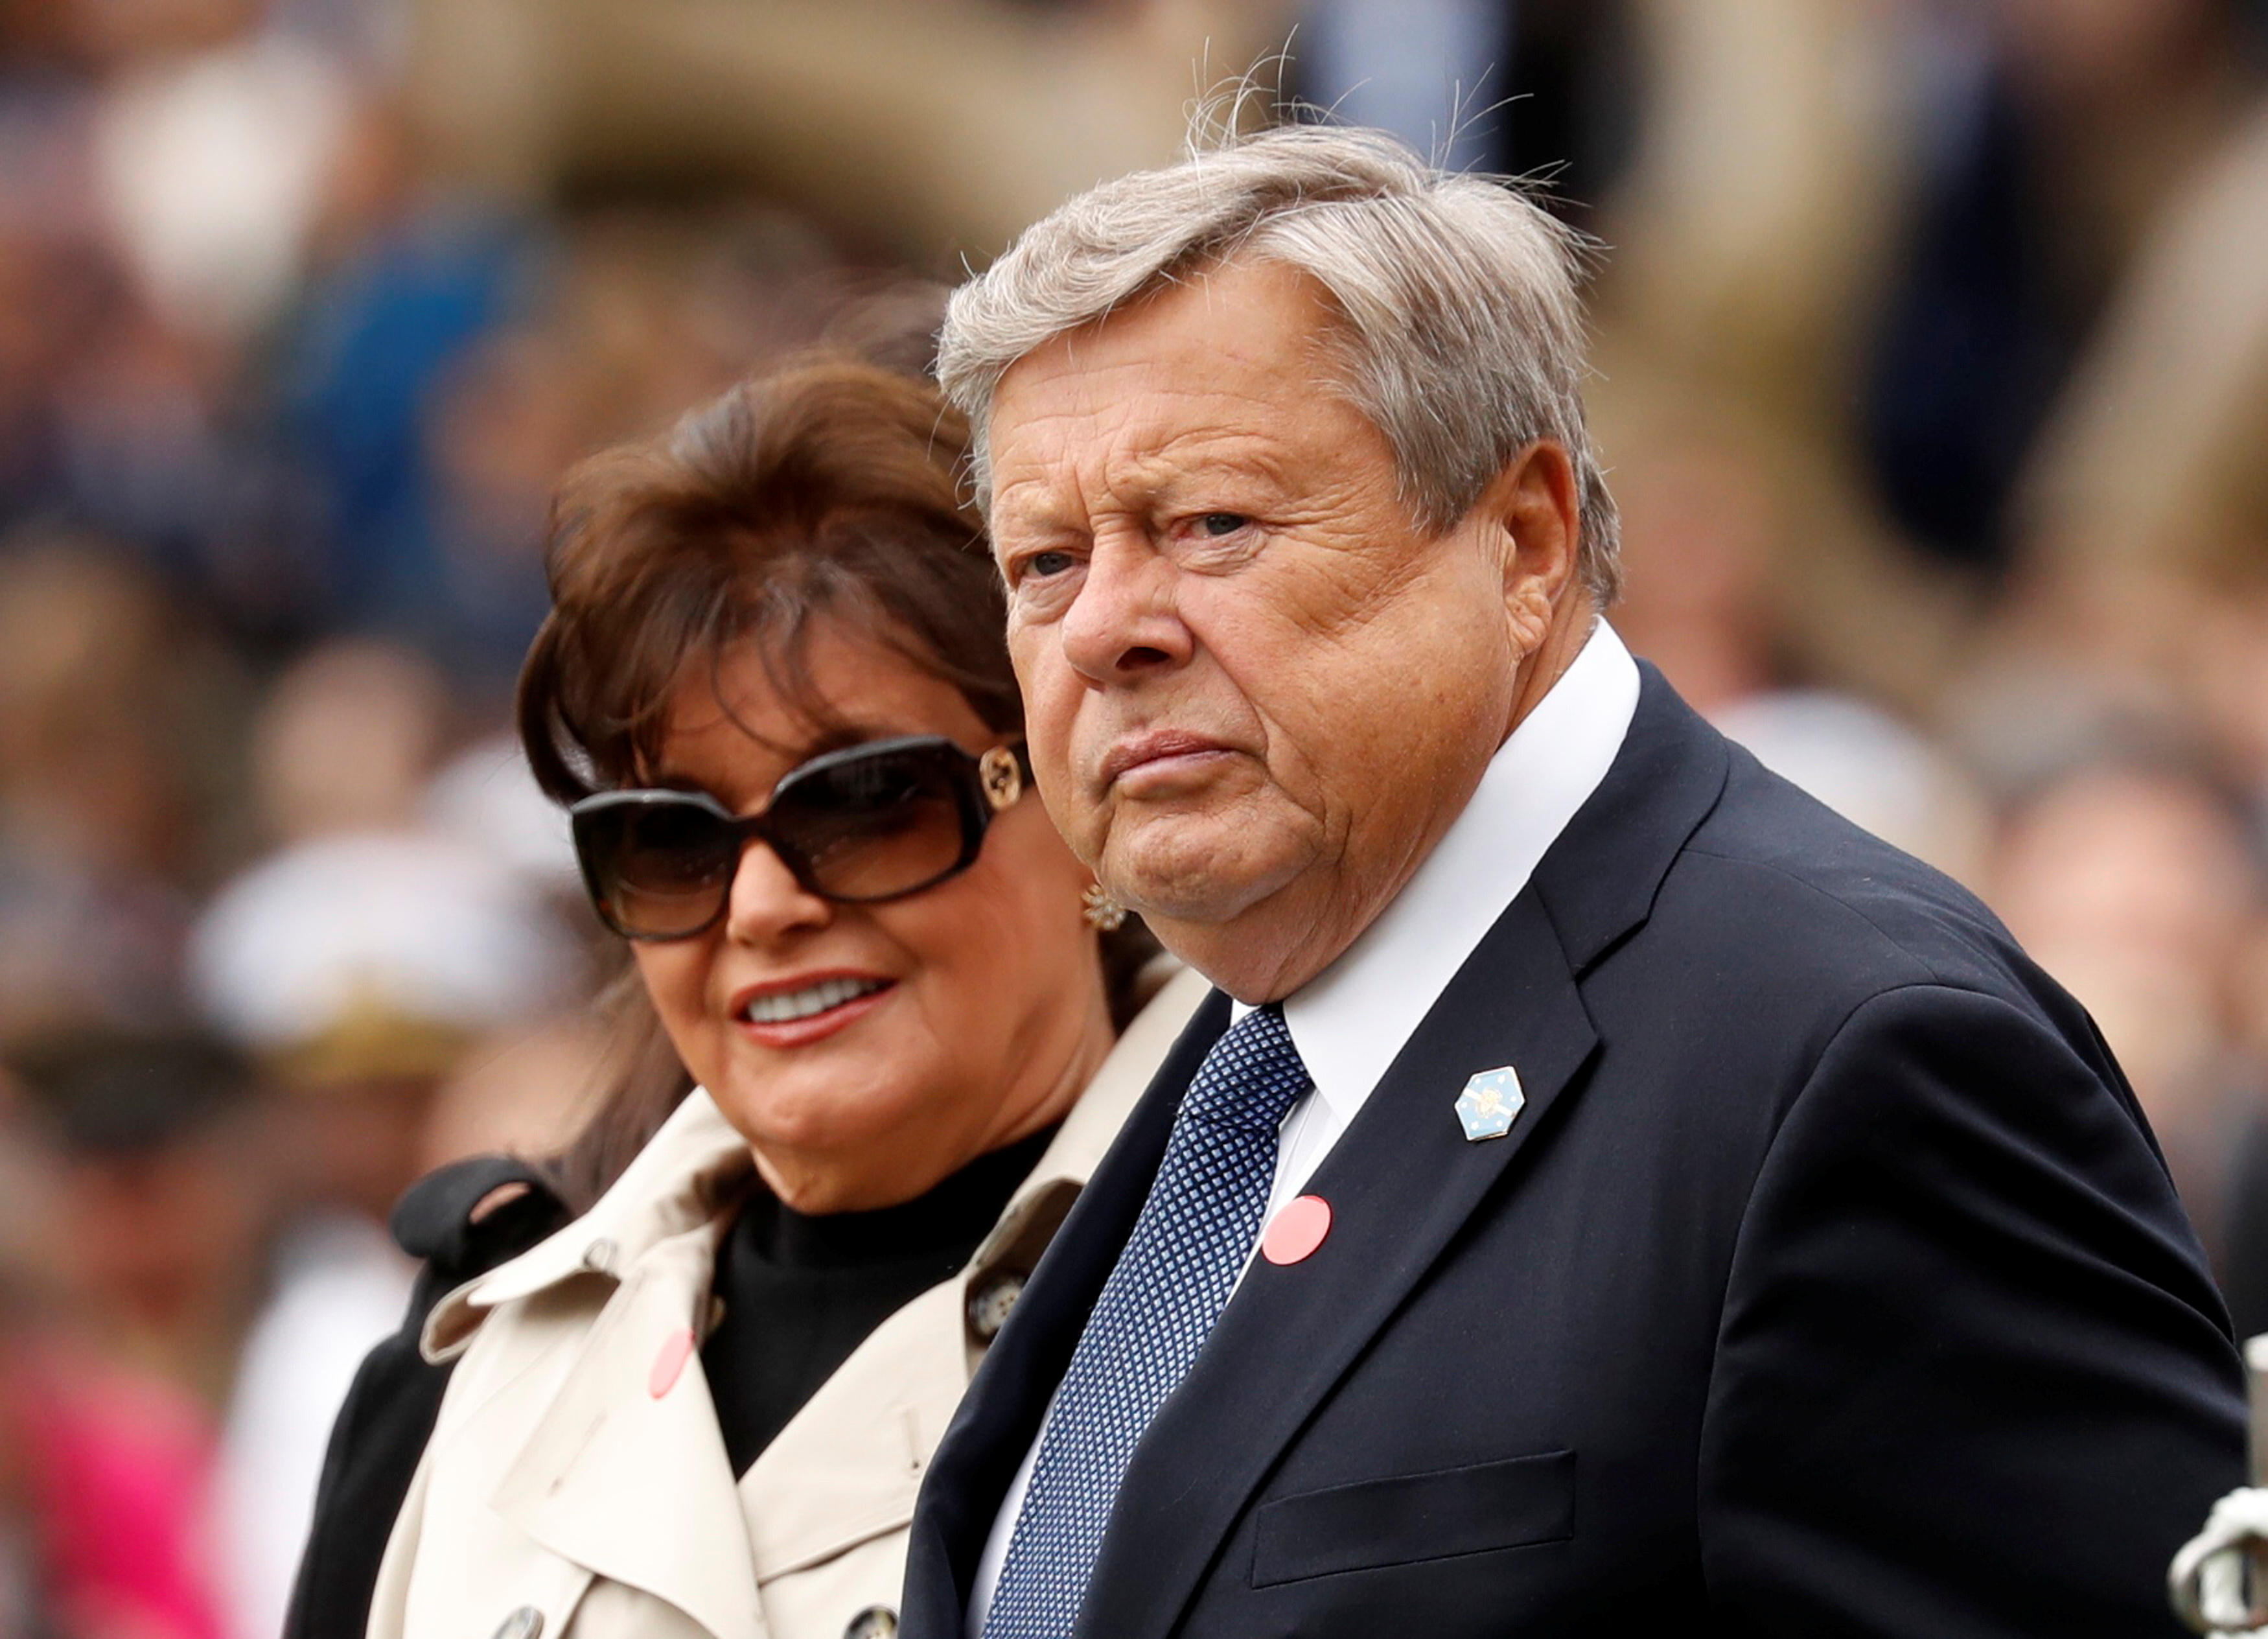 The parents of U.S. first lady Melania Trump, Viktor and Amalija Knavs, await the start of the official arrival ceremony held by U.S. President Donald Trump and Mrs. Trump for French President Emmanuel Macron and his wife Brigitte Macron on the South Lawn of the White House in Washington, U.S., April 24, 2018. REUTERS/Kevin Lamarque